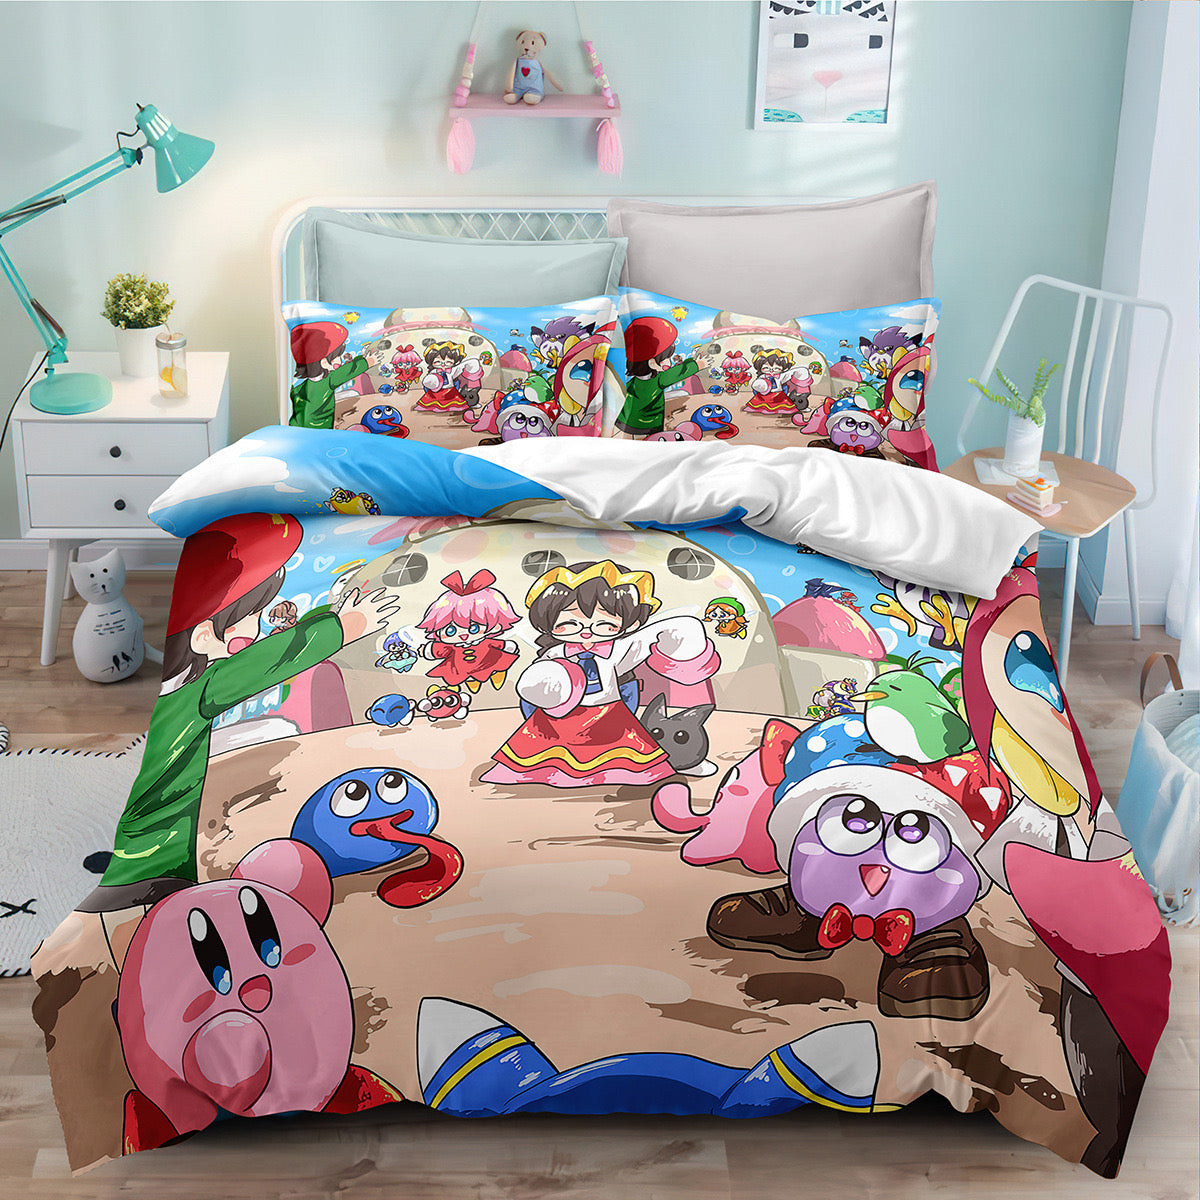 Kirby & The Amazing Mirror Duvet Cover Quilt Cover Pillowcase Bedding Set Bed Linen Home Bedroom Decor